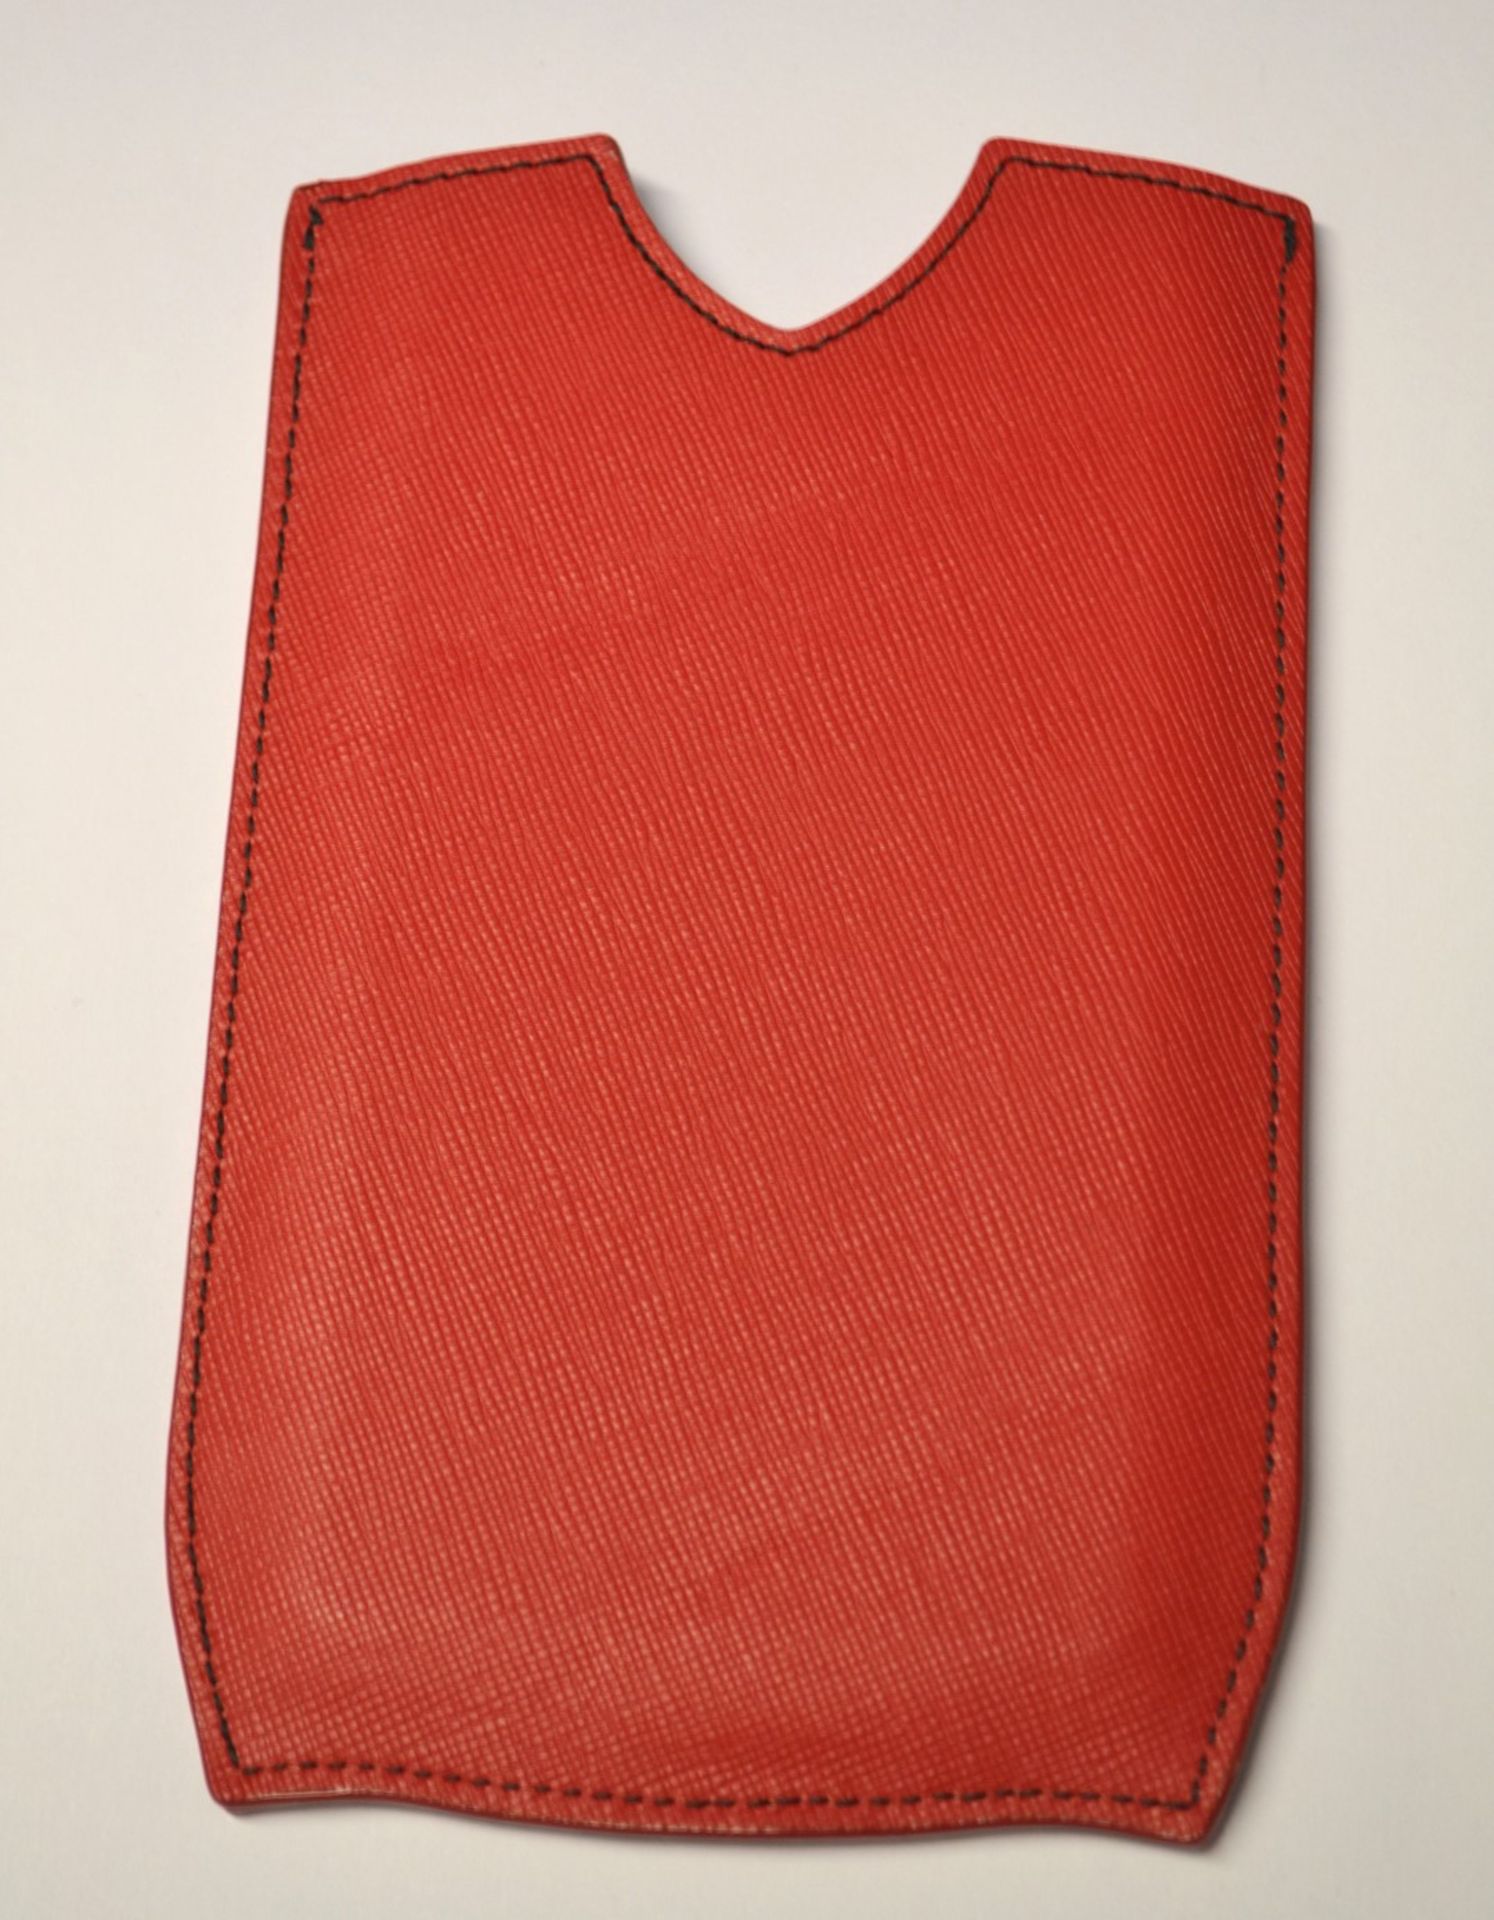 1 x Limited Edition Lamborghini "88 Tauri" Phone Case - Features An Exquisite Genuine Leather Finish - Image 3 of 4